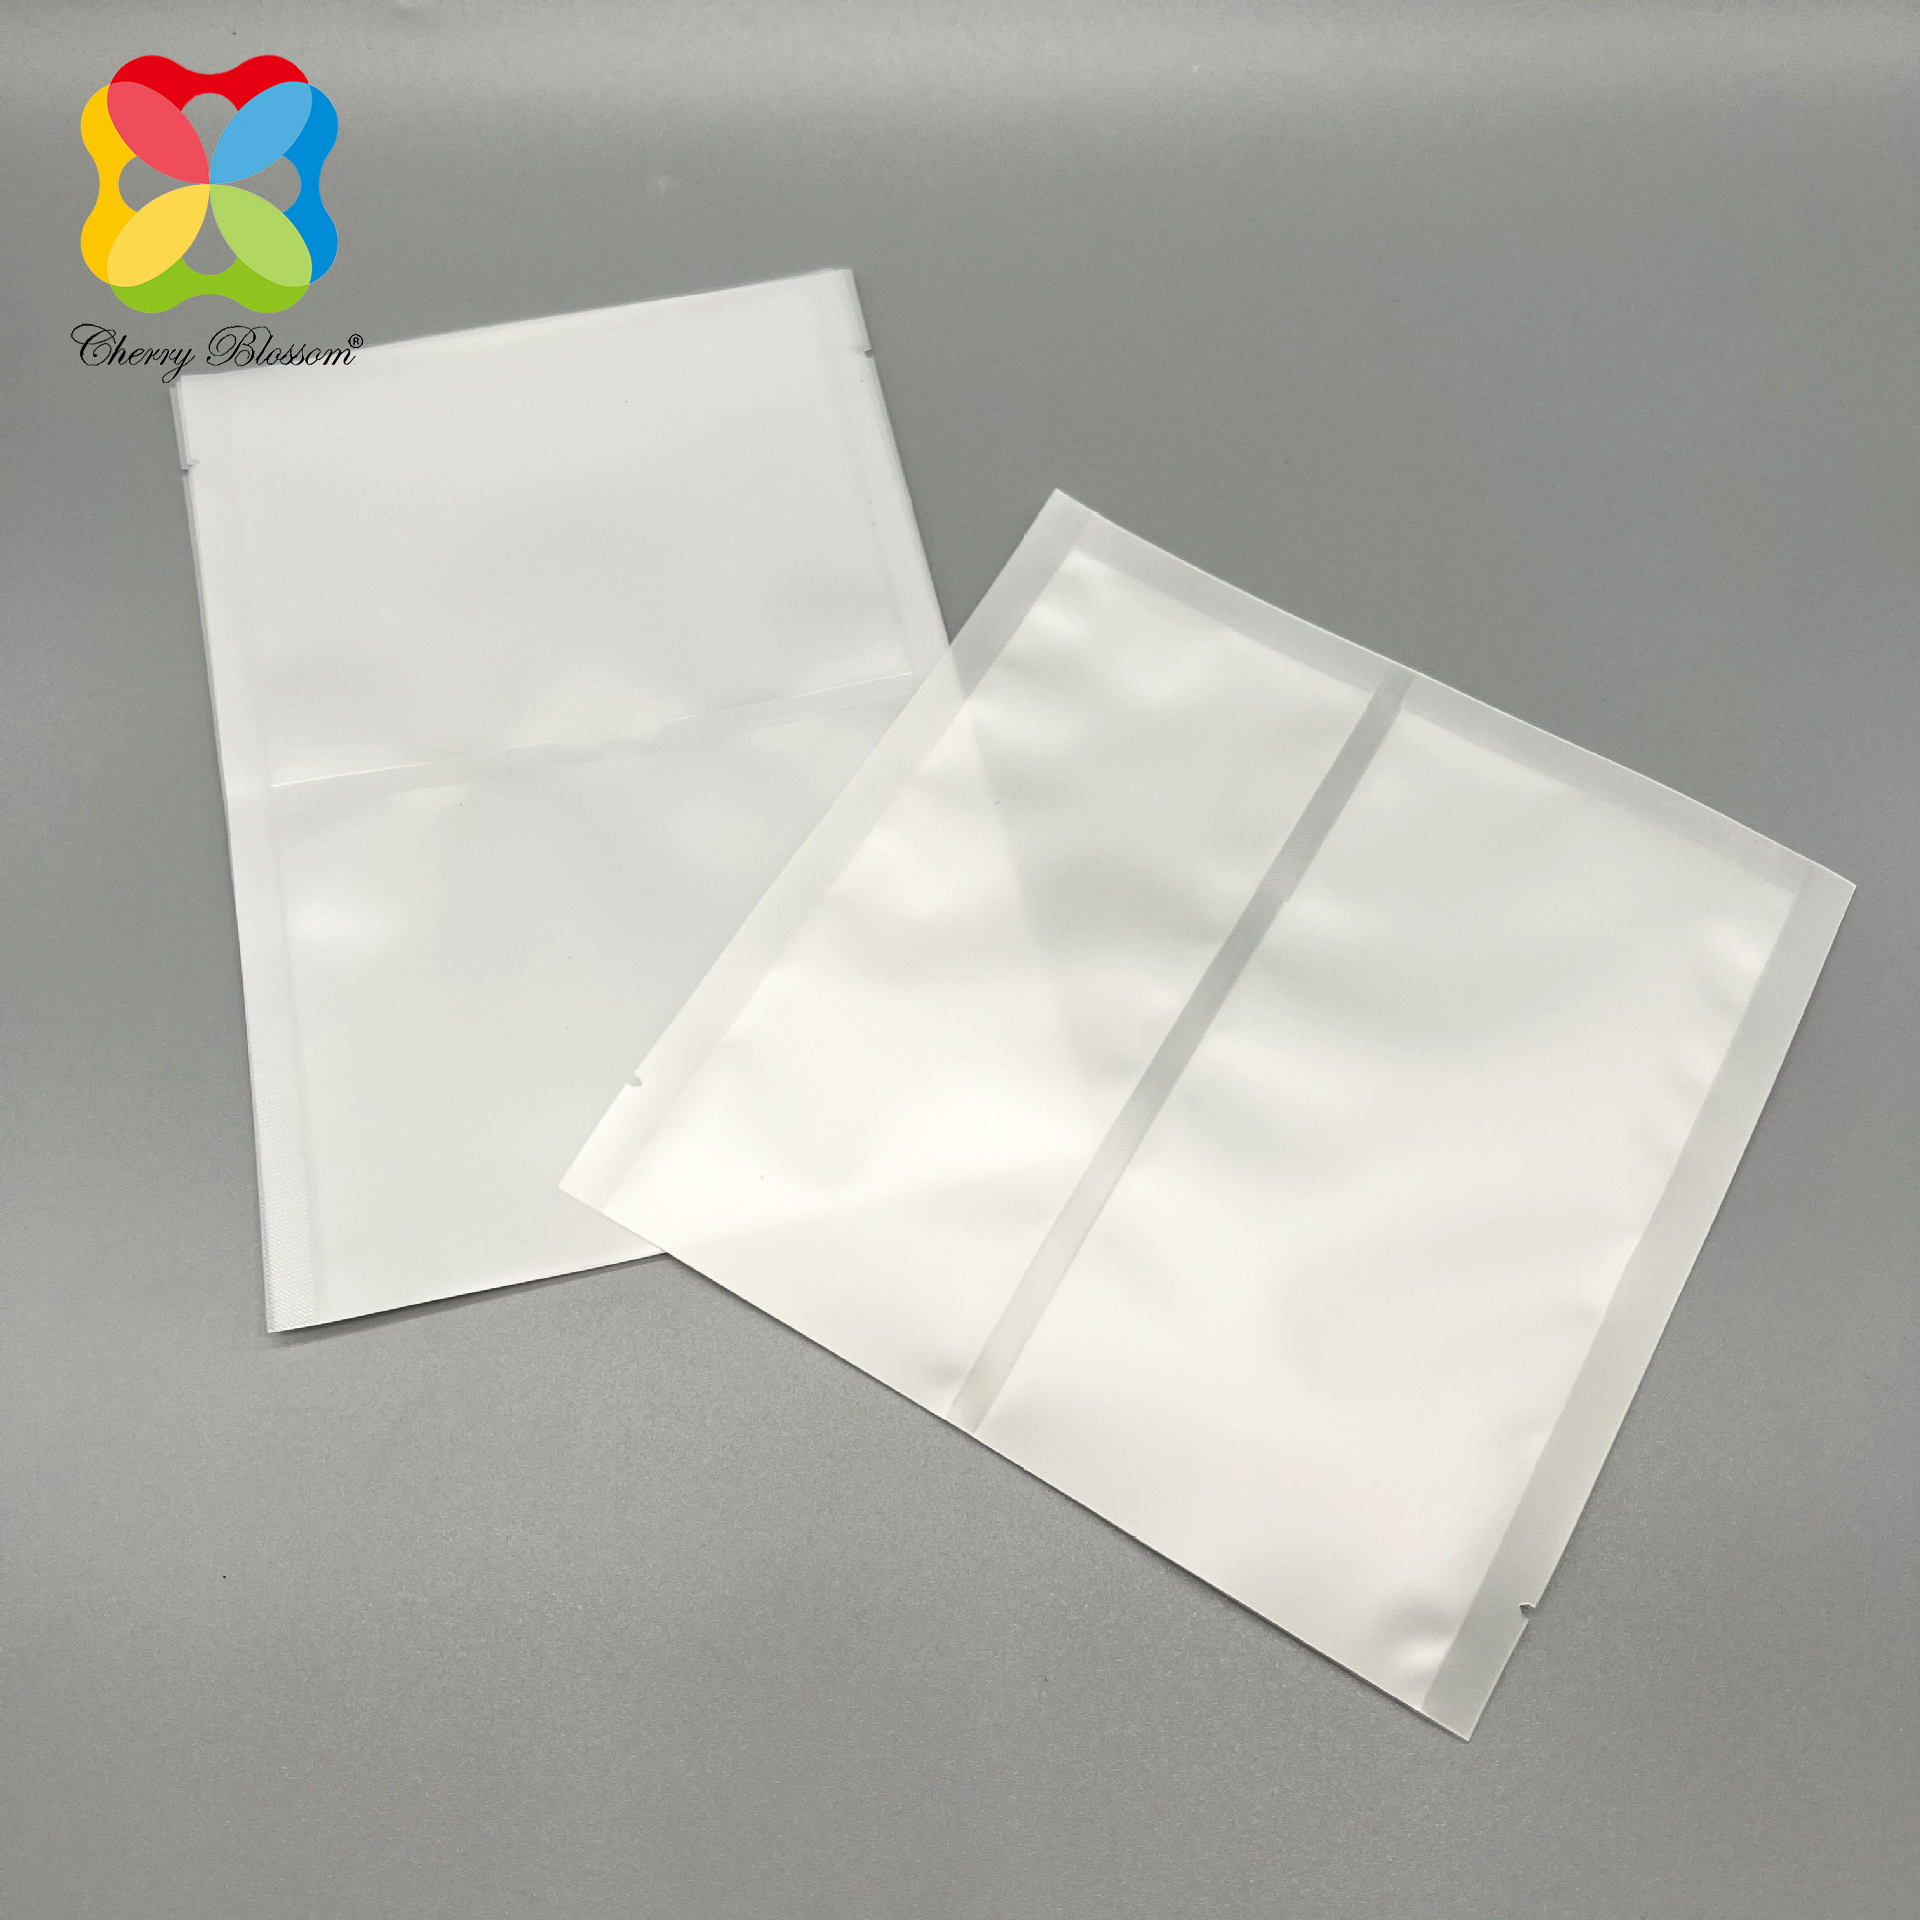 https://www.stblossom.com/custom-printed-two-in-one-dry-and-wet-separation-bag-food-packaging-product/